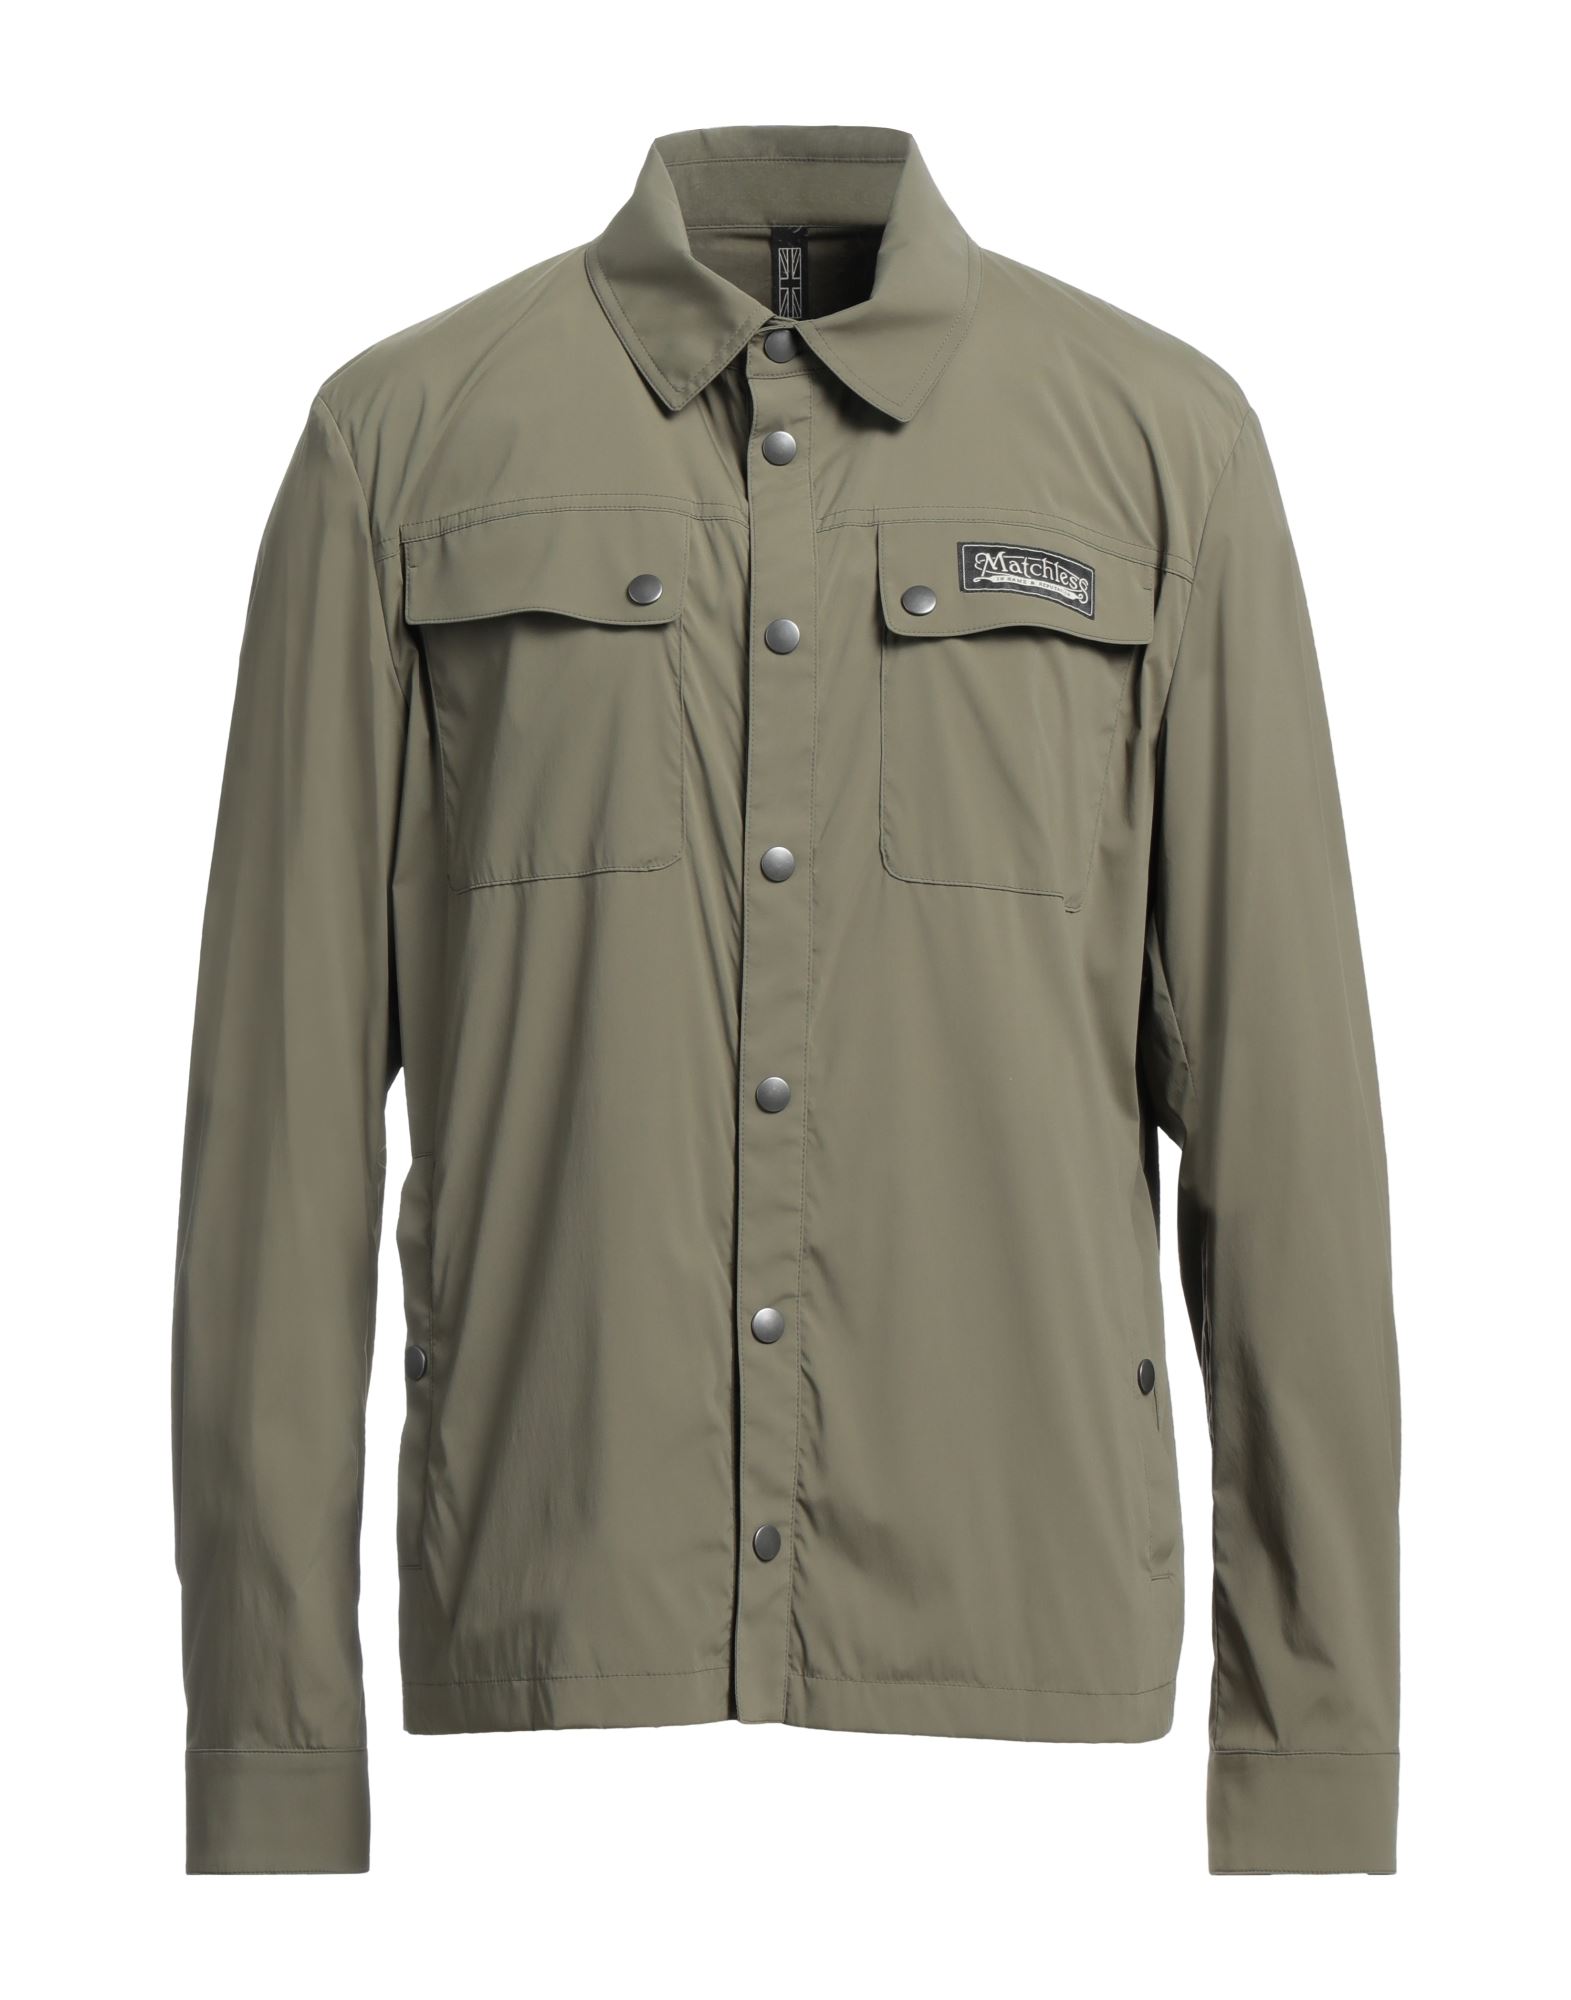 Matchless Shirts In Green